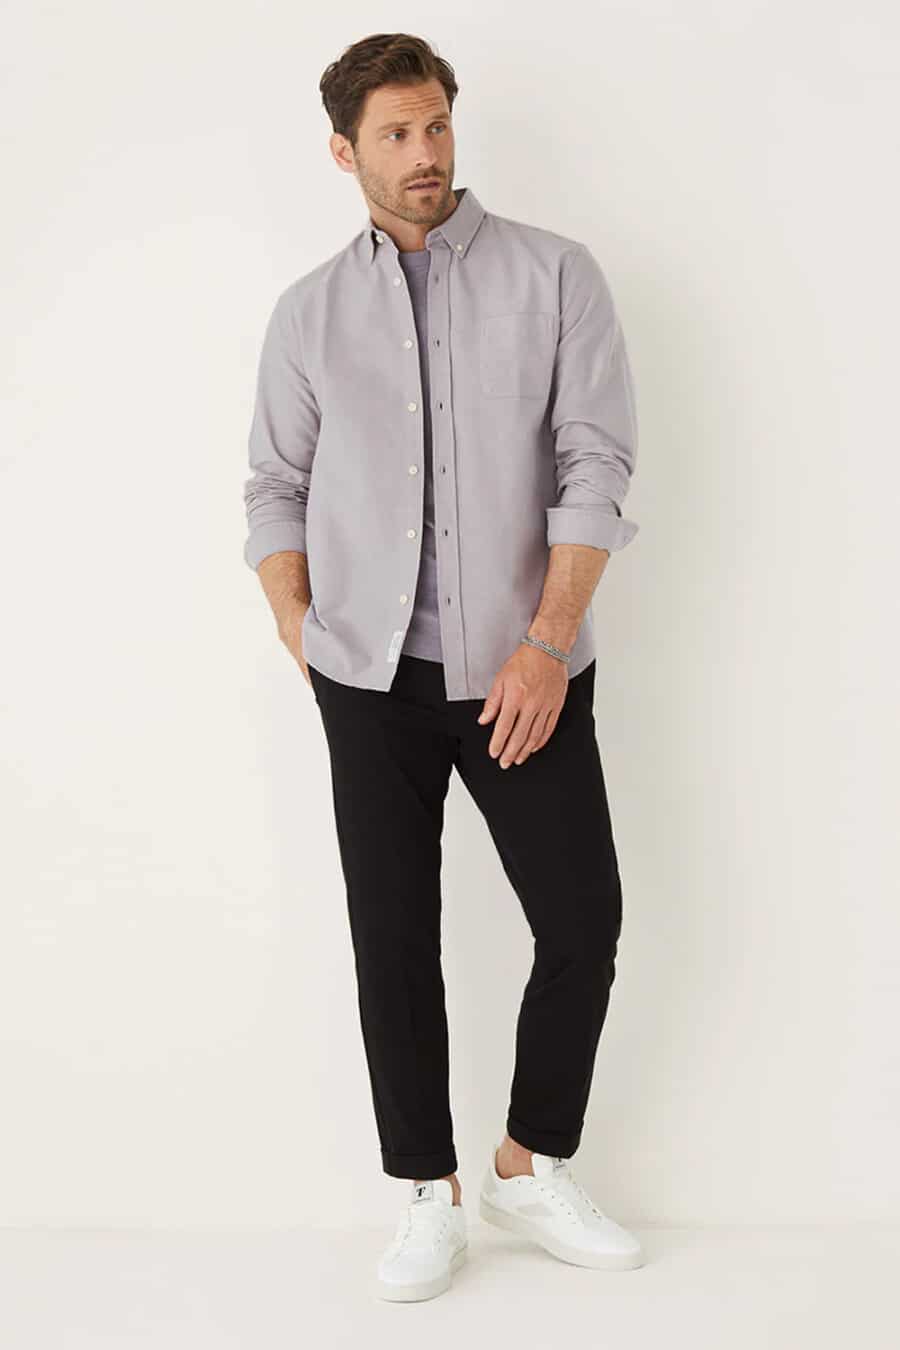 Men's black chino pants, purple T-shirt, light purple shirt and white sneakers outfit